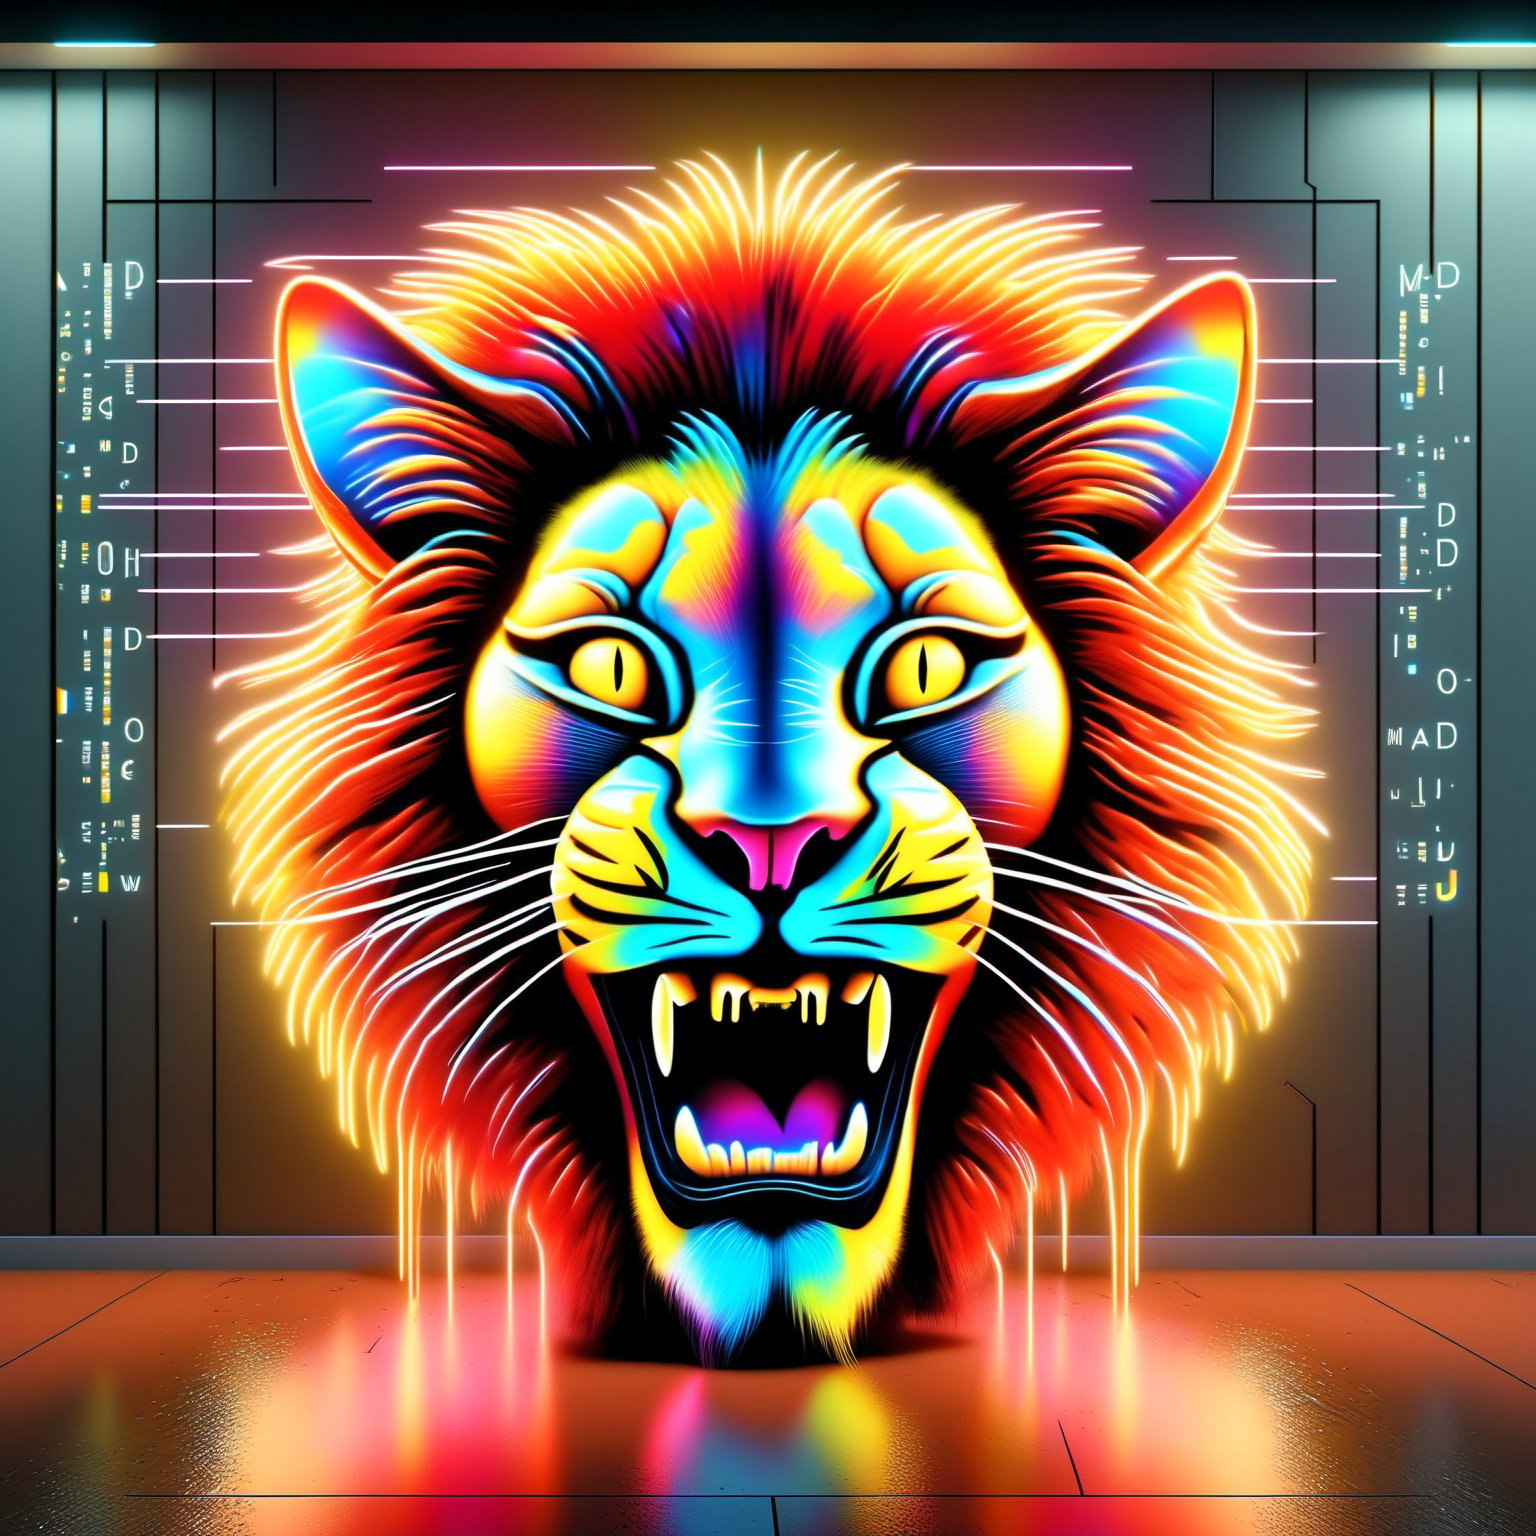 (((text "Mad Cat"))),#D Neon bright colors red orange and yellow of a MAD CAT Lion face eyes squinted moth open showing teeth, Neon multy colored matrix code falling from the top in the background, intelligence concepts HD wallpaper,DonMH010D15pl4yXL ,